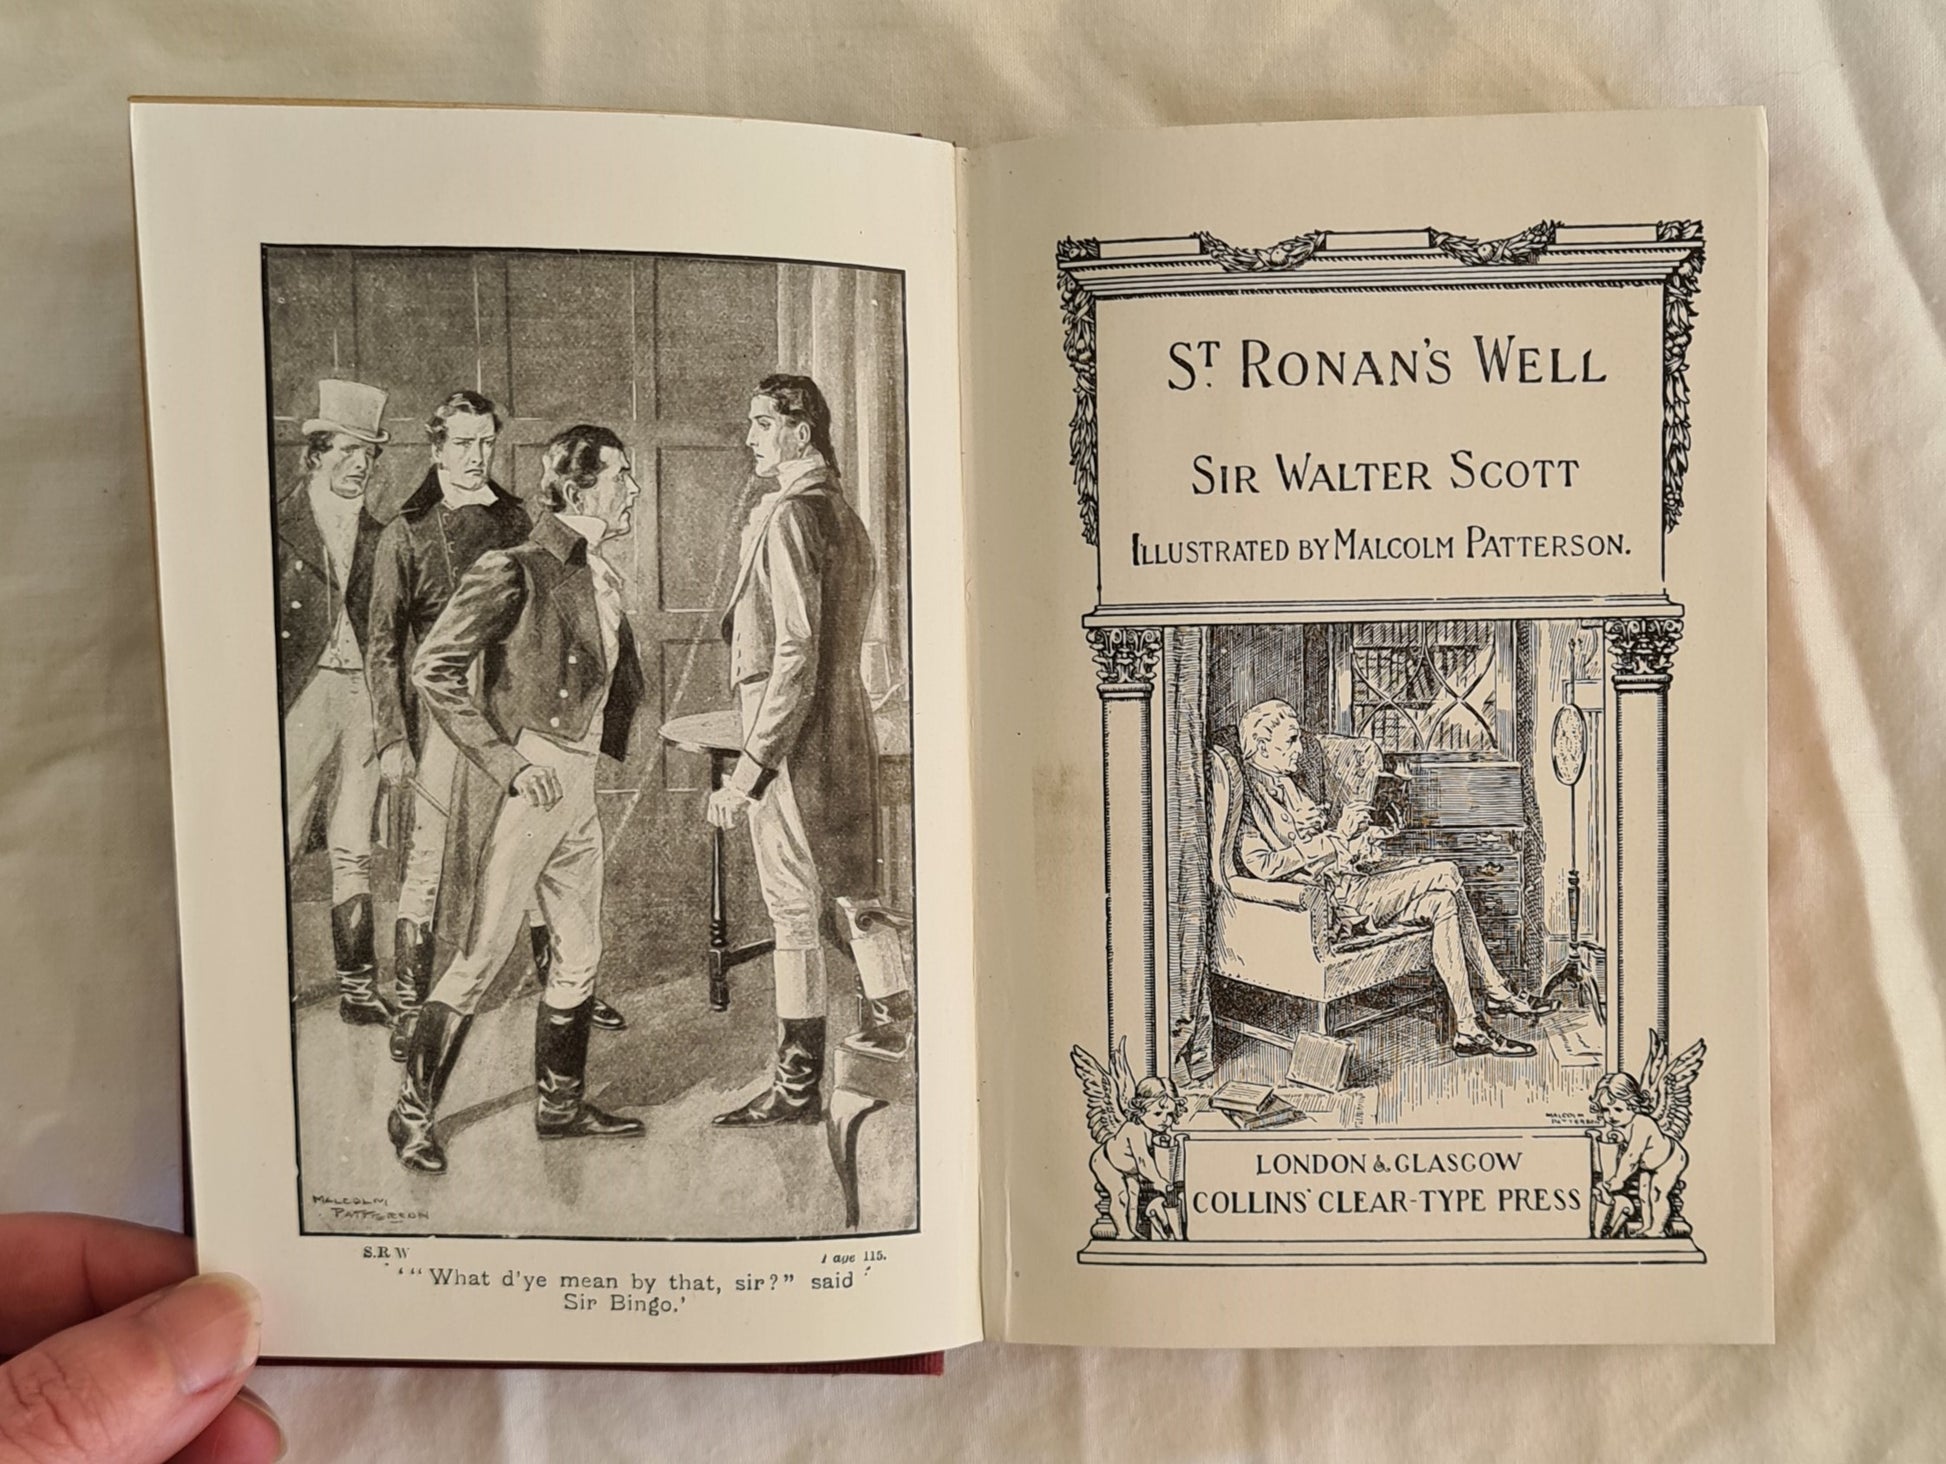 St. Ronan’s Well  by Sir Walter Scott  illustrated by Malcolm Patterson  Illustrated Pocket Classics